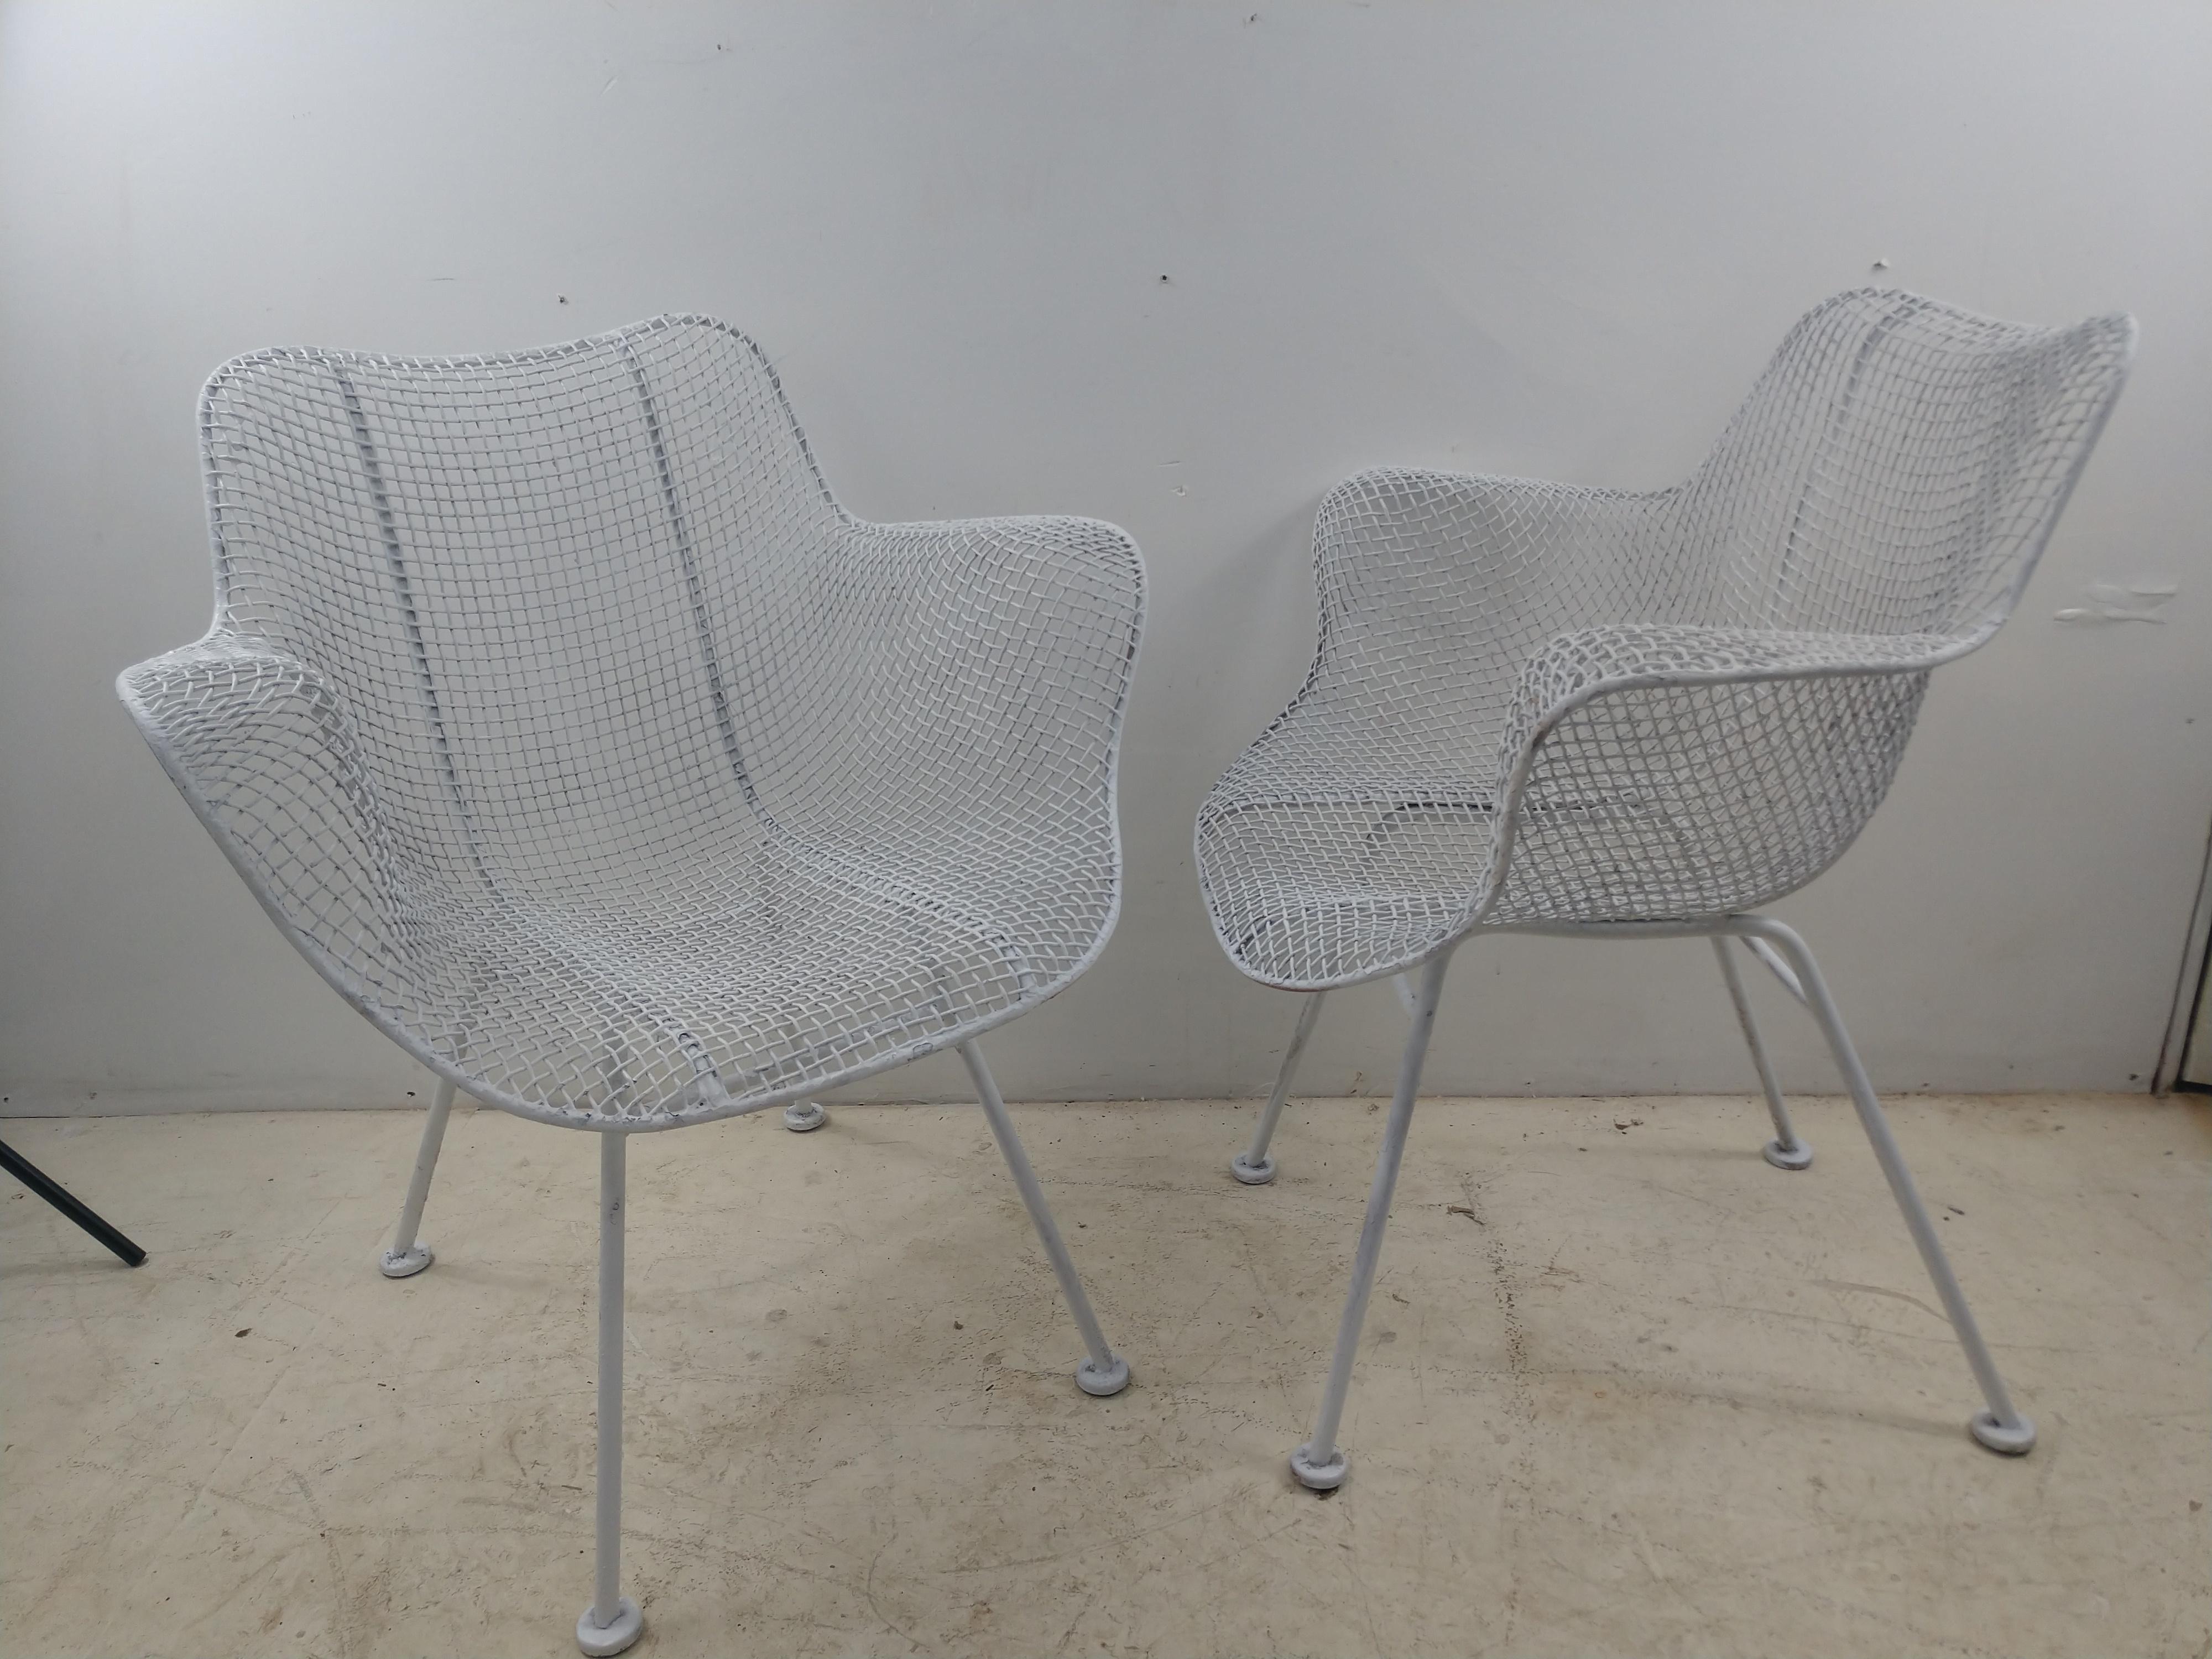 Molded Pair of Mid-Century Modern Sculptural Armchairs by Russell Woodard, circa 1955